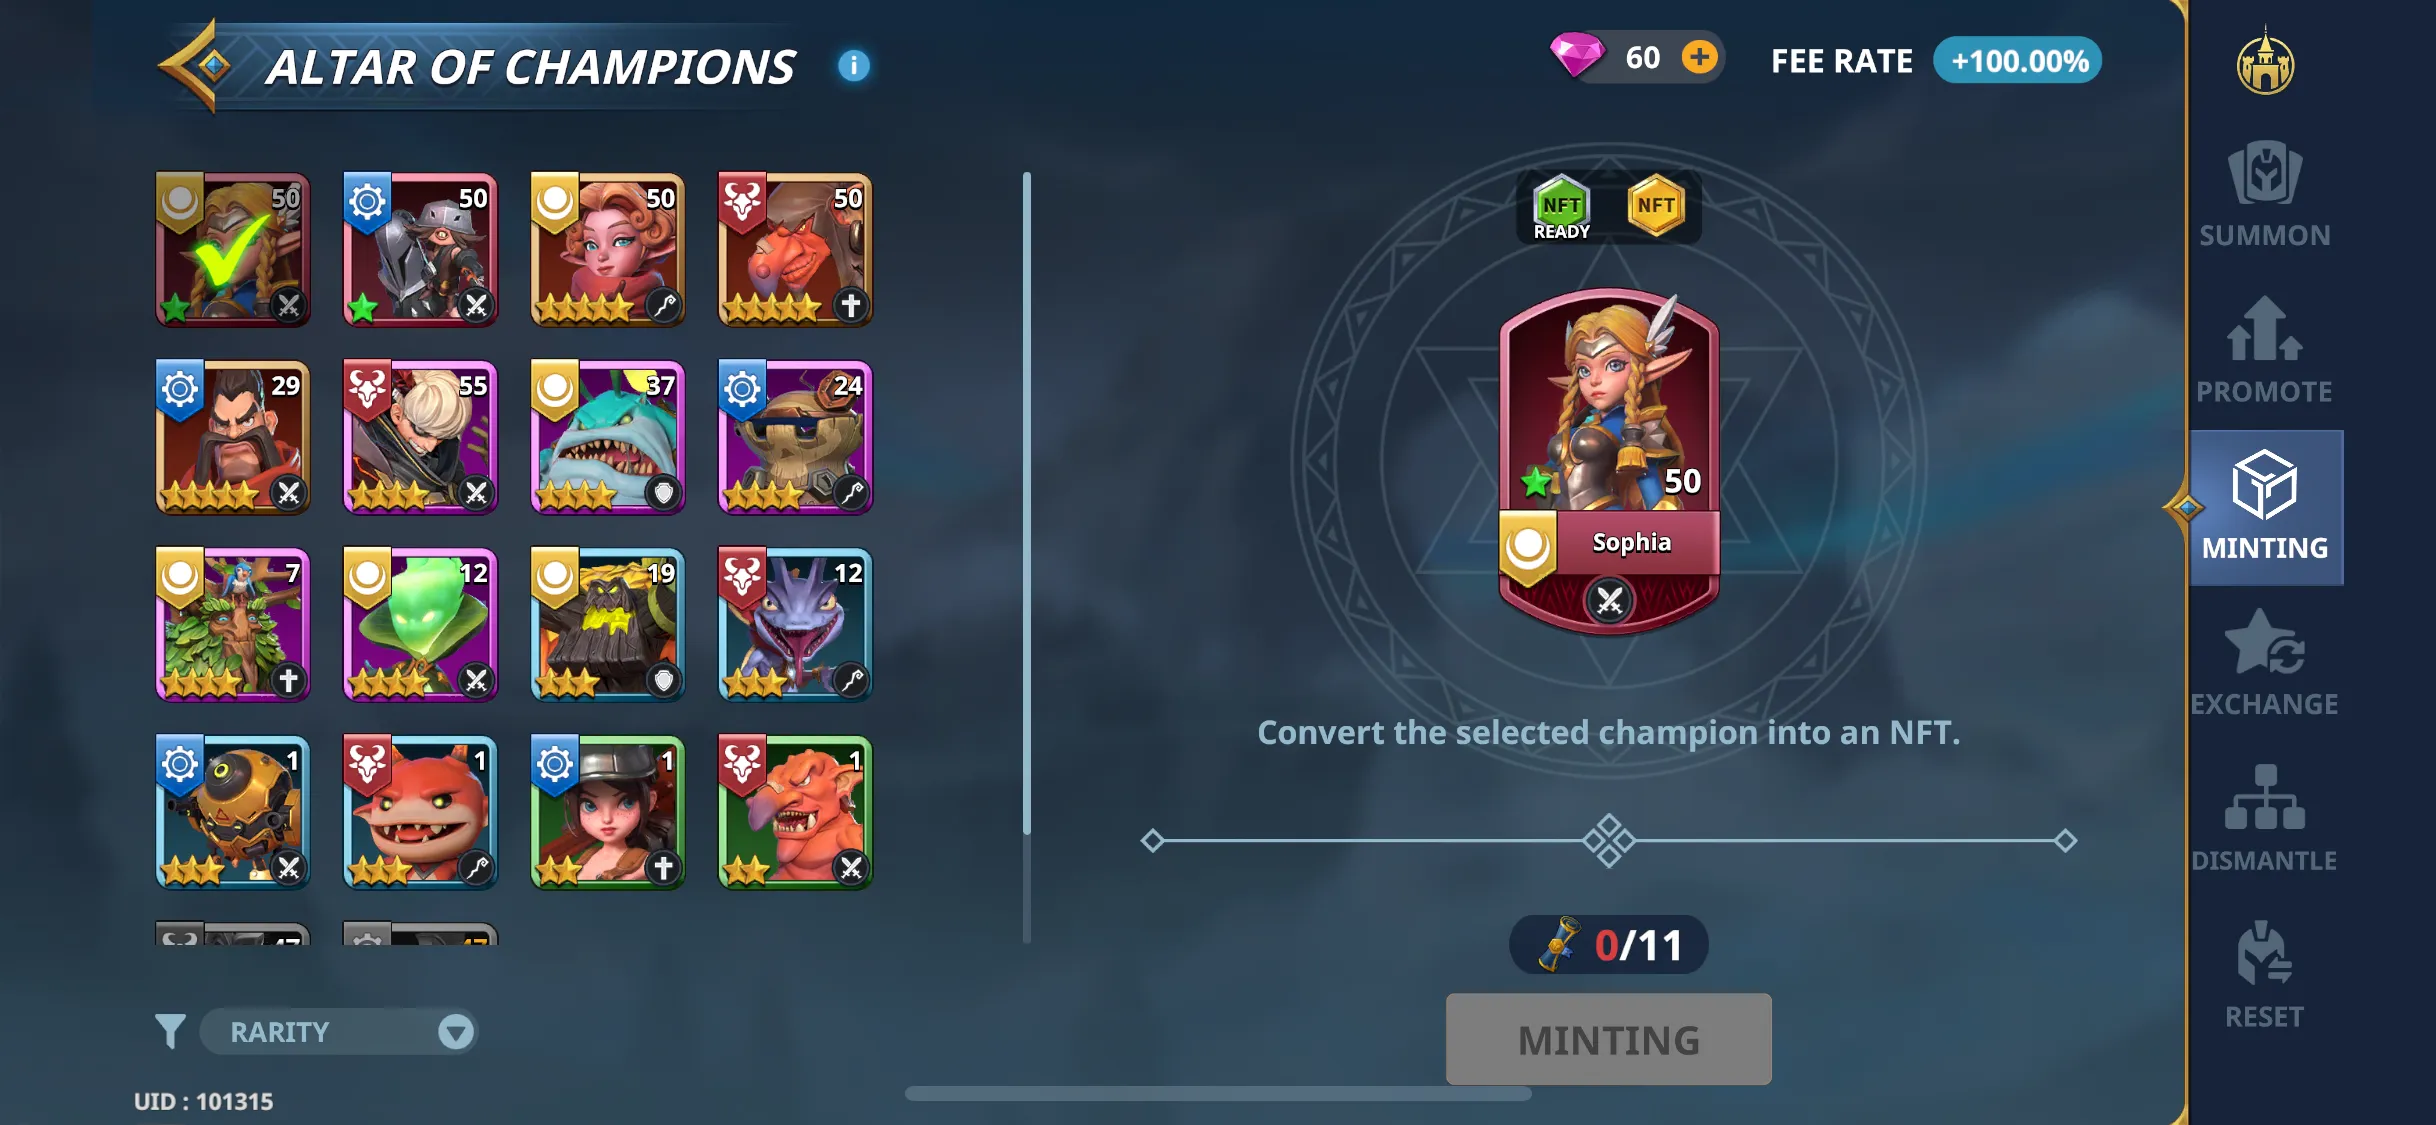 Champions Arena Beginner's Guide: How to Start Playing the NFT